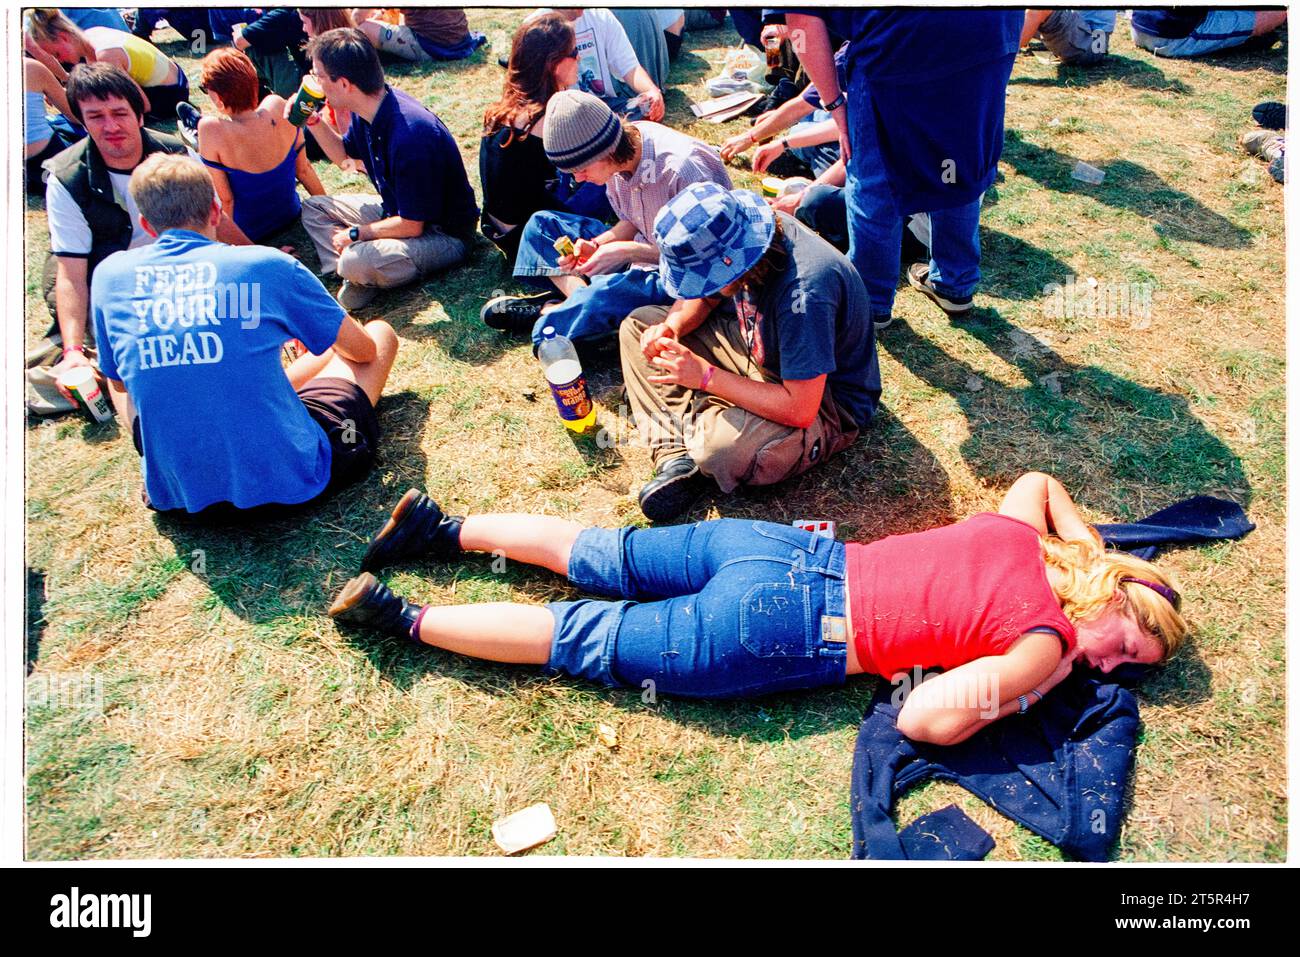 BRITPOP and ROCK FANS, READING FESTIVAL, 1998: The extreme heat and the long days are too much for this woman and she crashes out to sleep while her friends roll cigarettes. A scene from the site and crowd in the Main Stage arena area at Reading Festival 1998 on 28-30 August 1998 in Reading, England UK. Photo: Rob Watkins Stock Photo